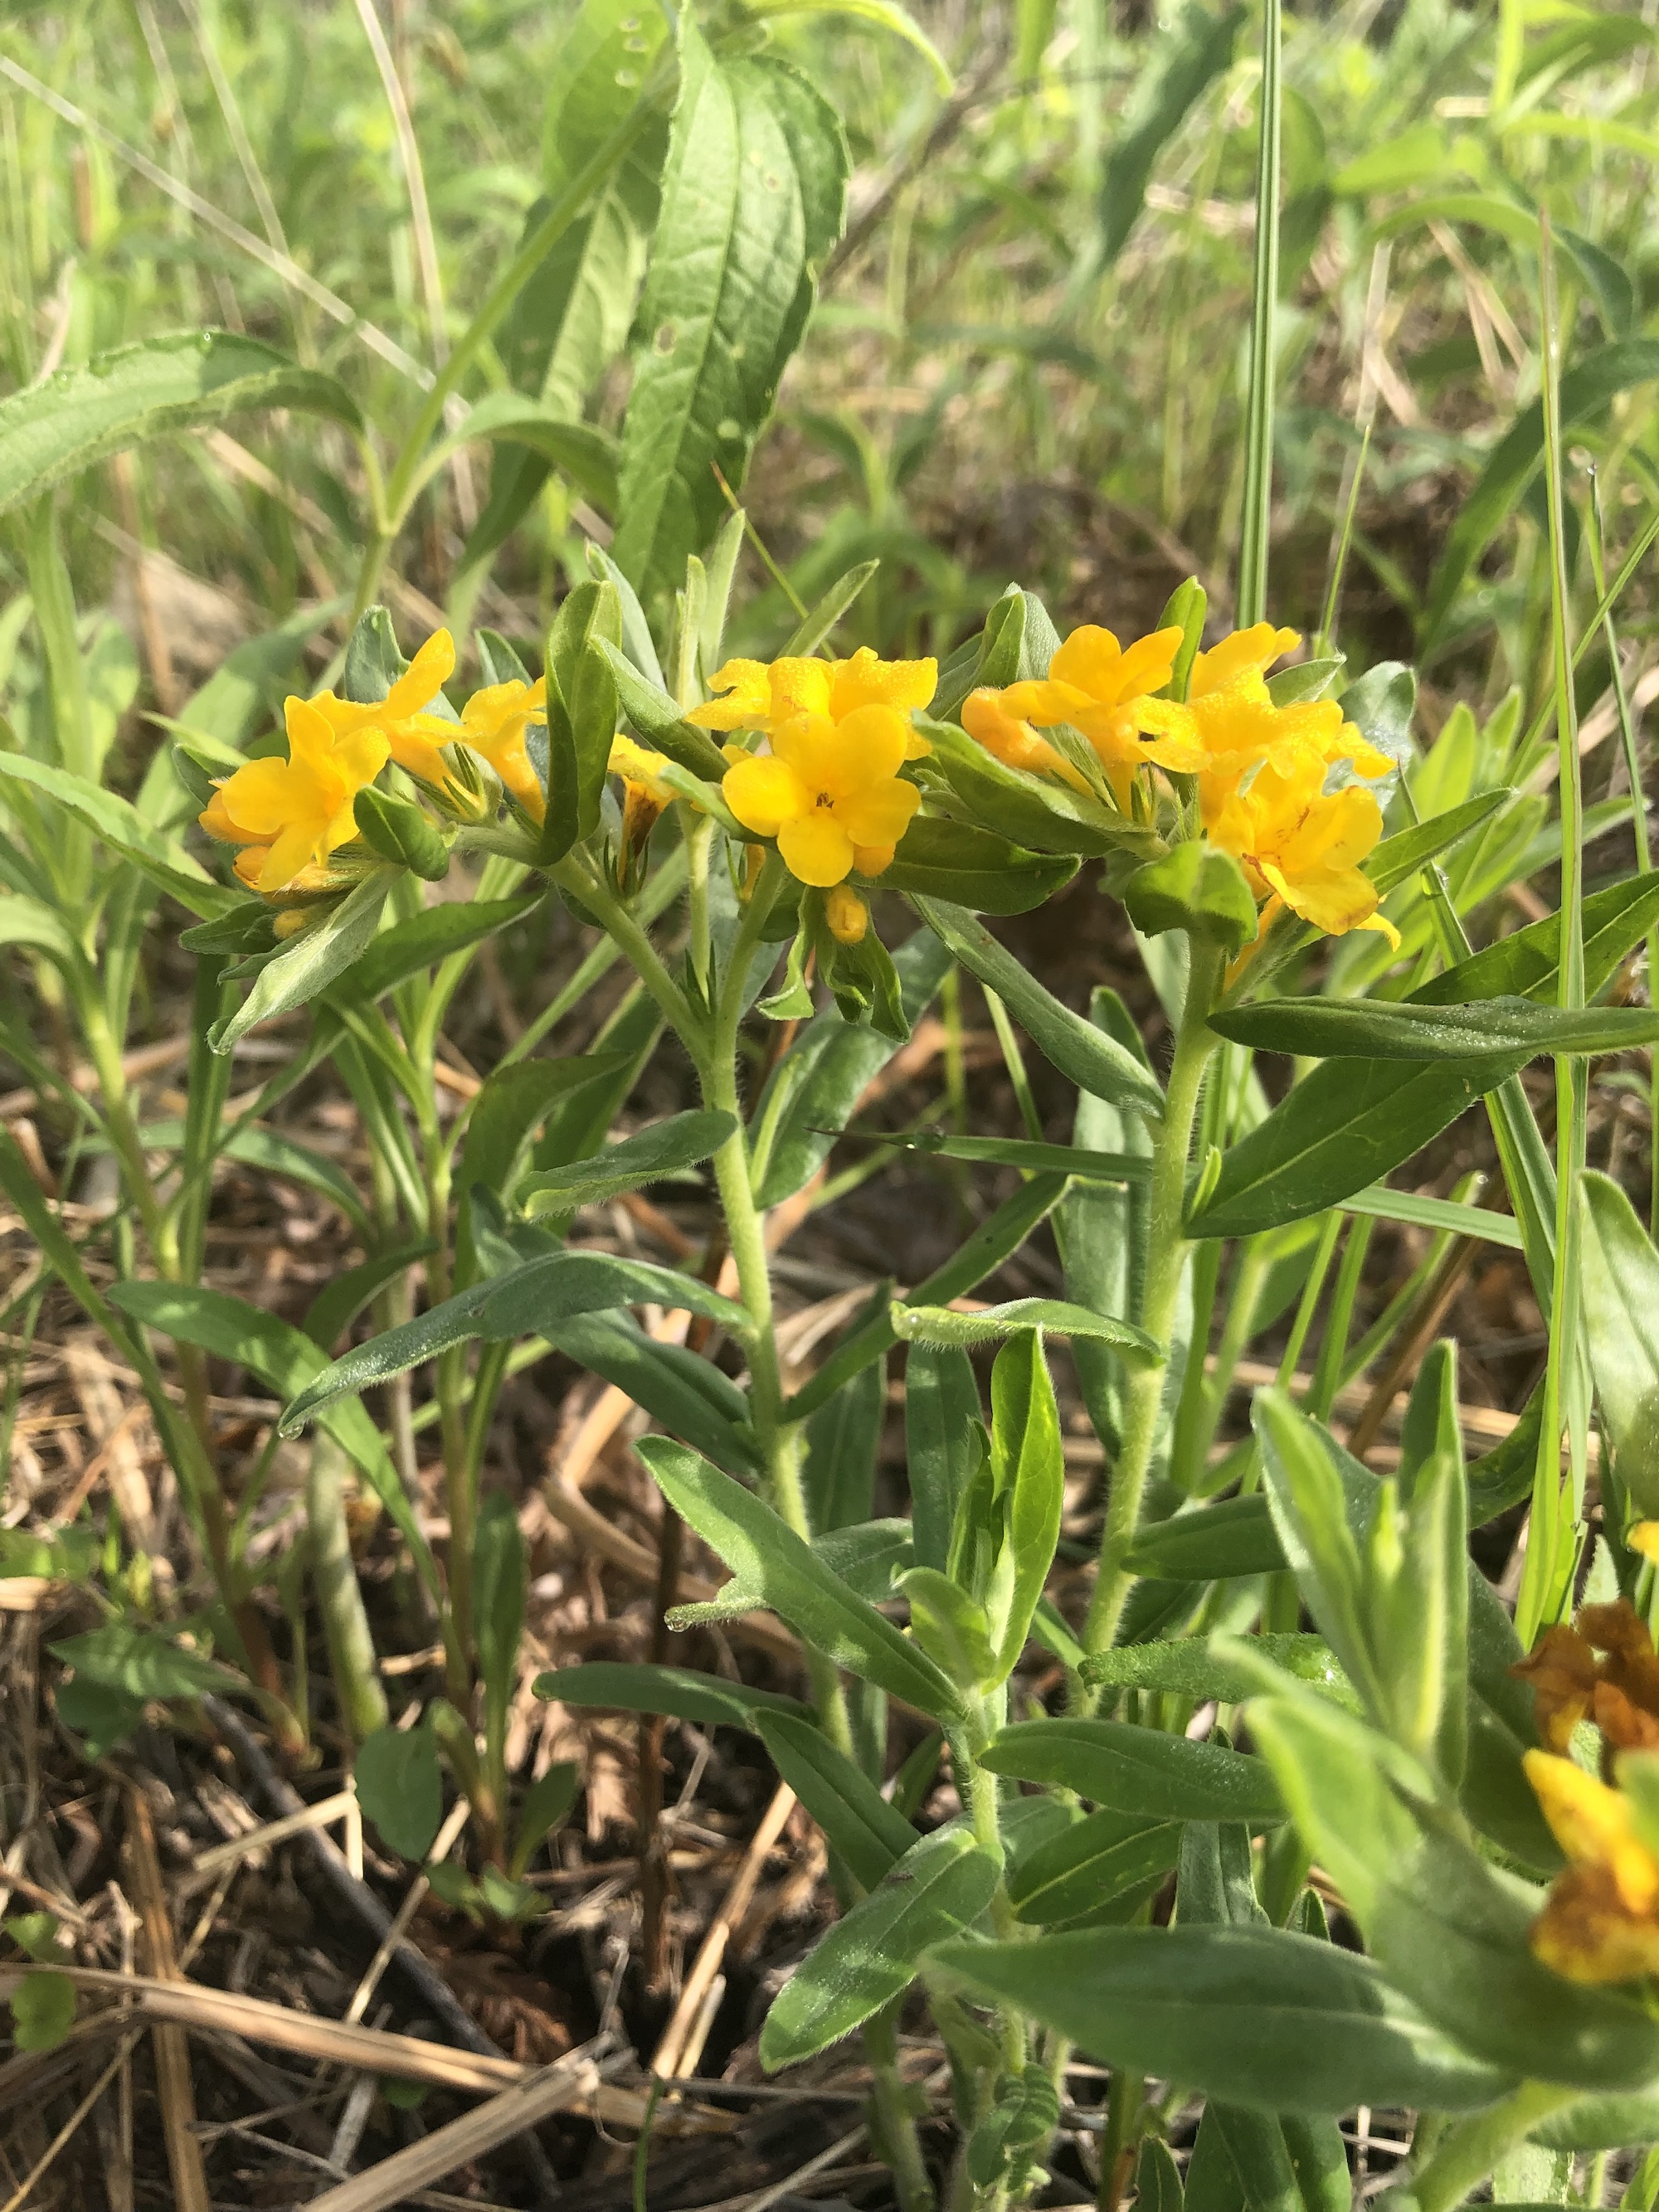 Hoary Puccoon in the Curtis Prairie in the University of Wisconsin-Madison Arboretum in Madison, Wisconsin on May 19, 2022.